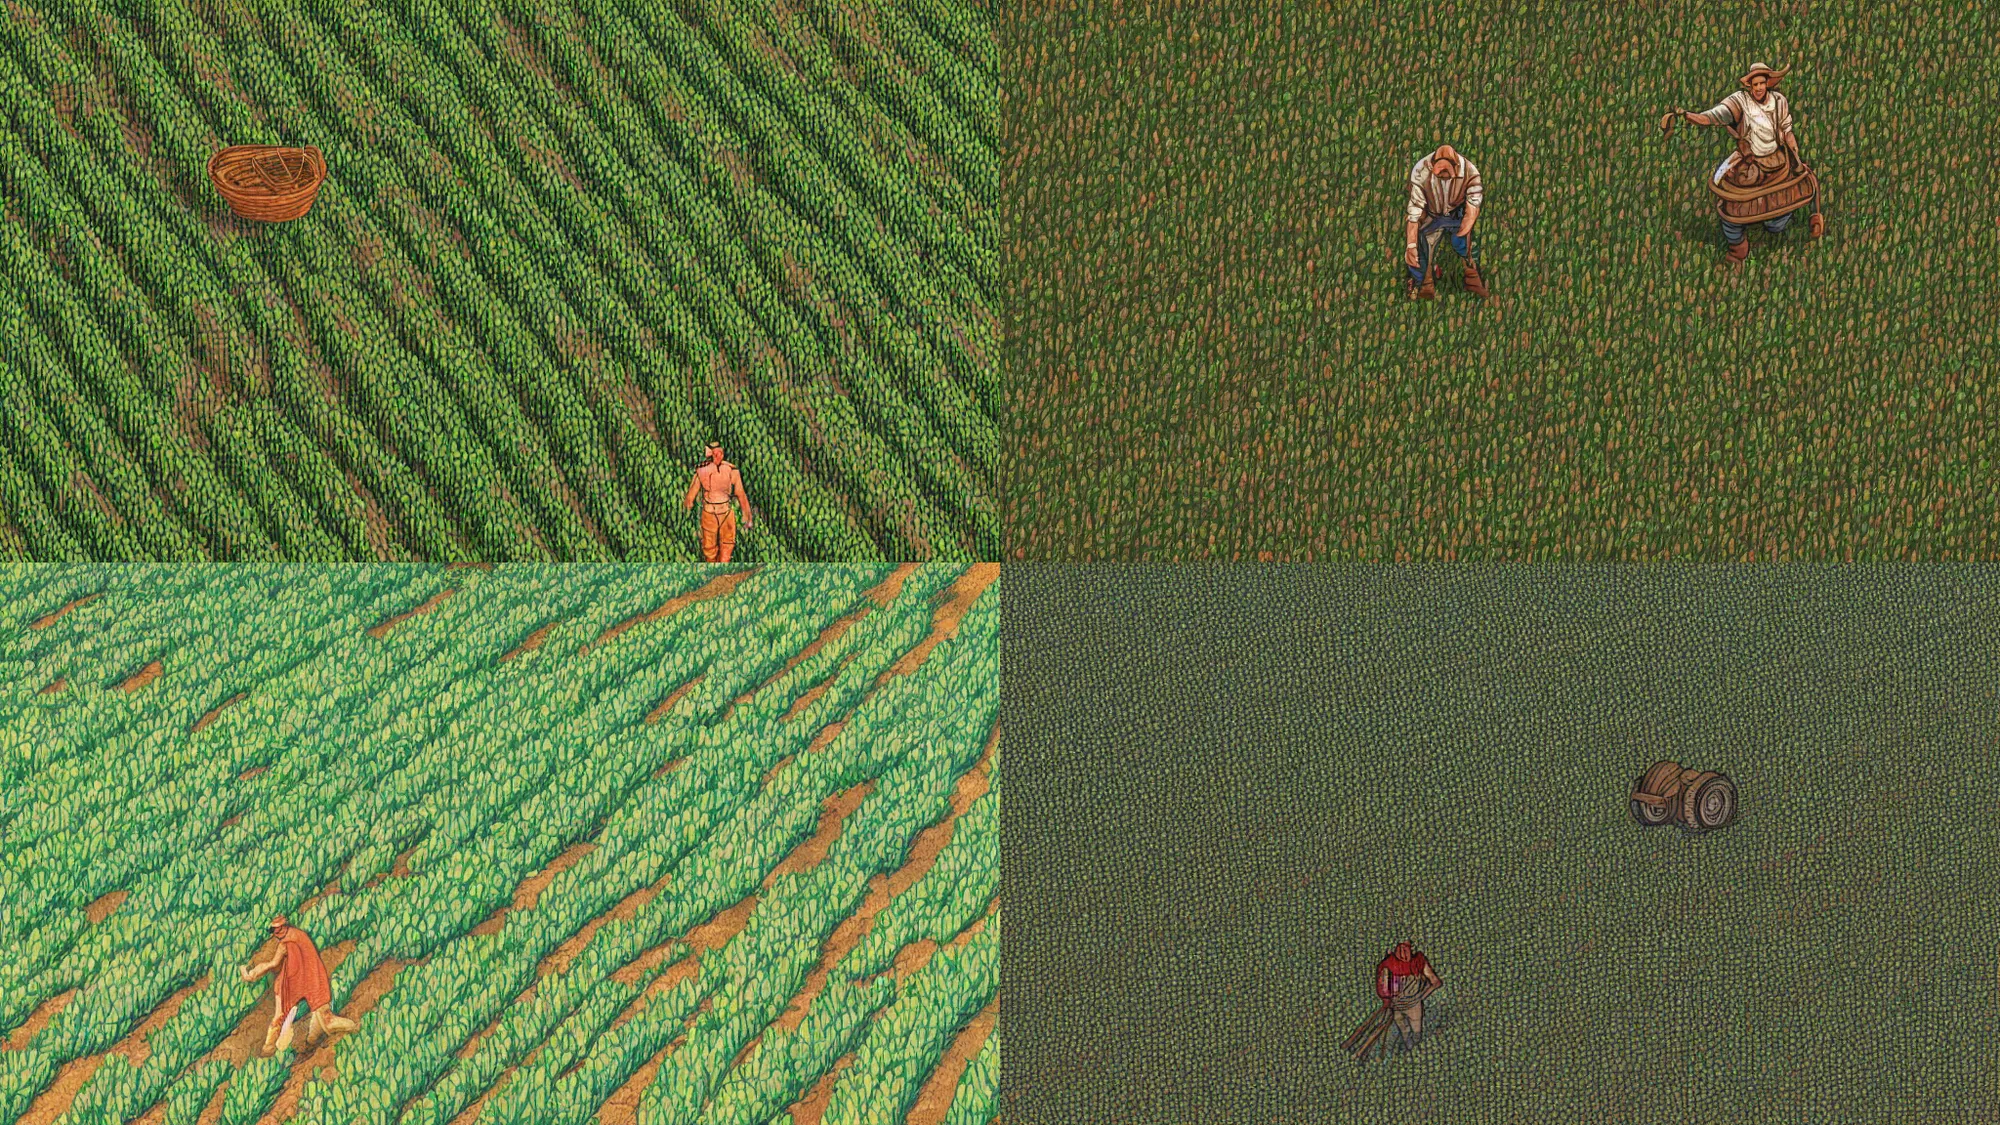 Prompt: gigachad farmer in immaculate rows of crops, detailed digital 2d fantasy art